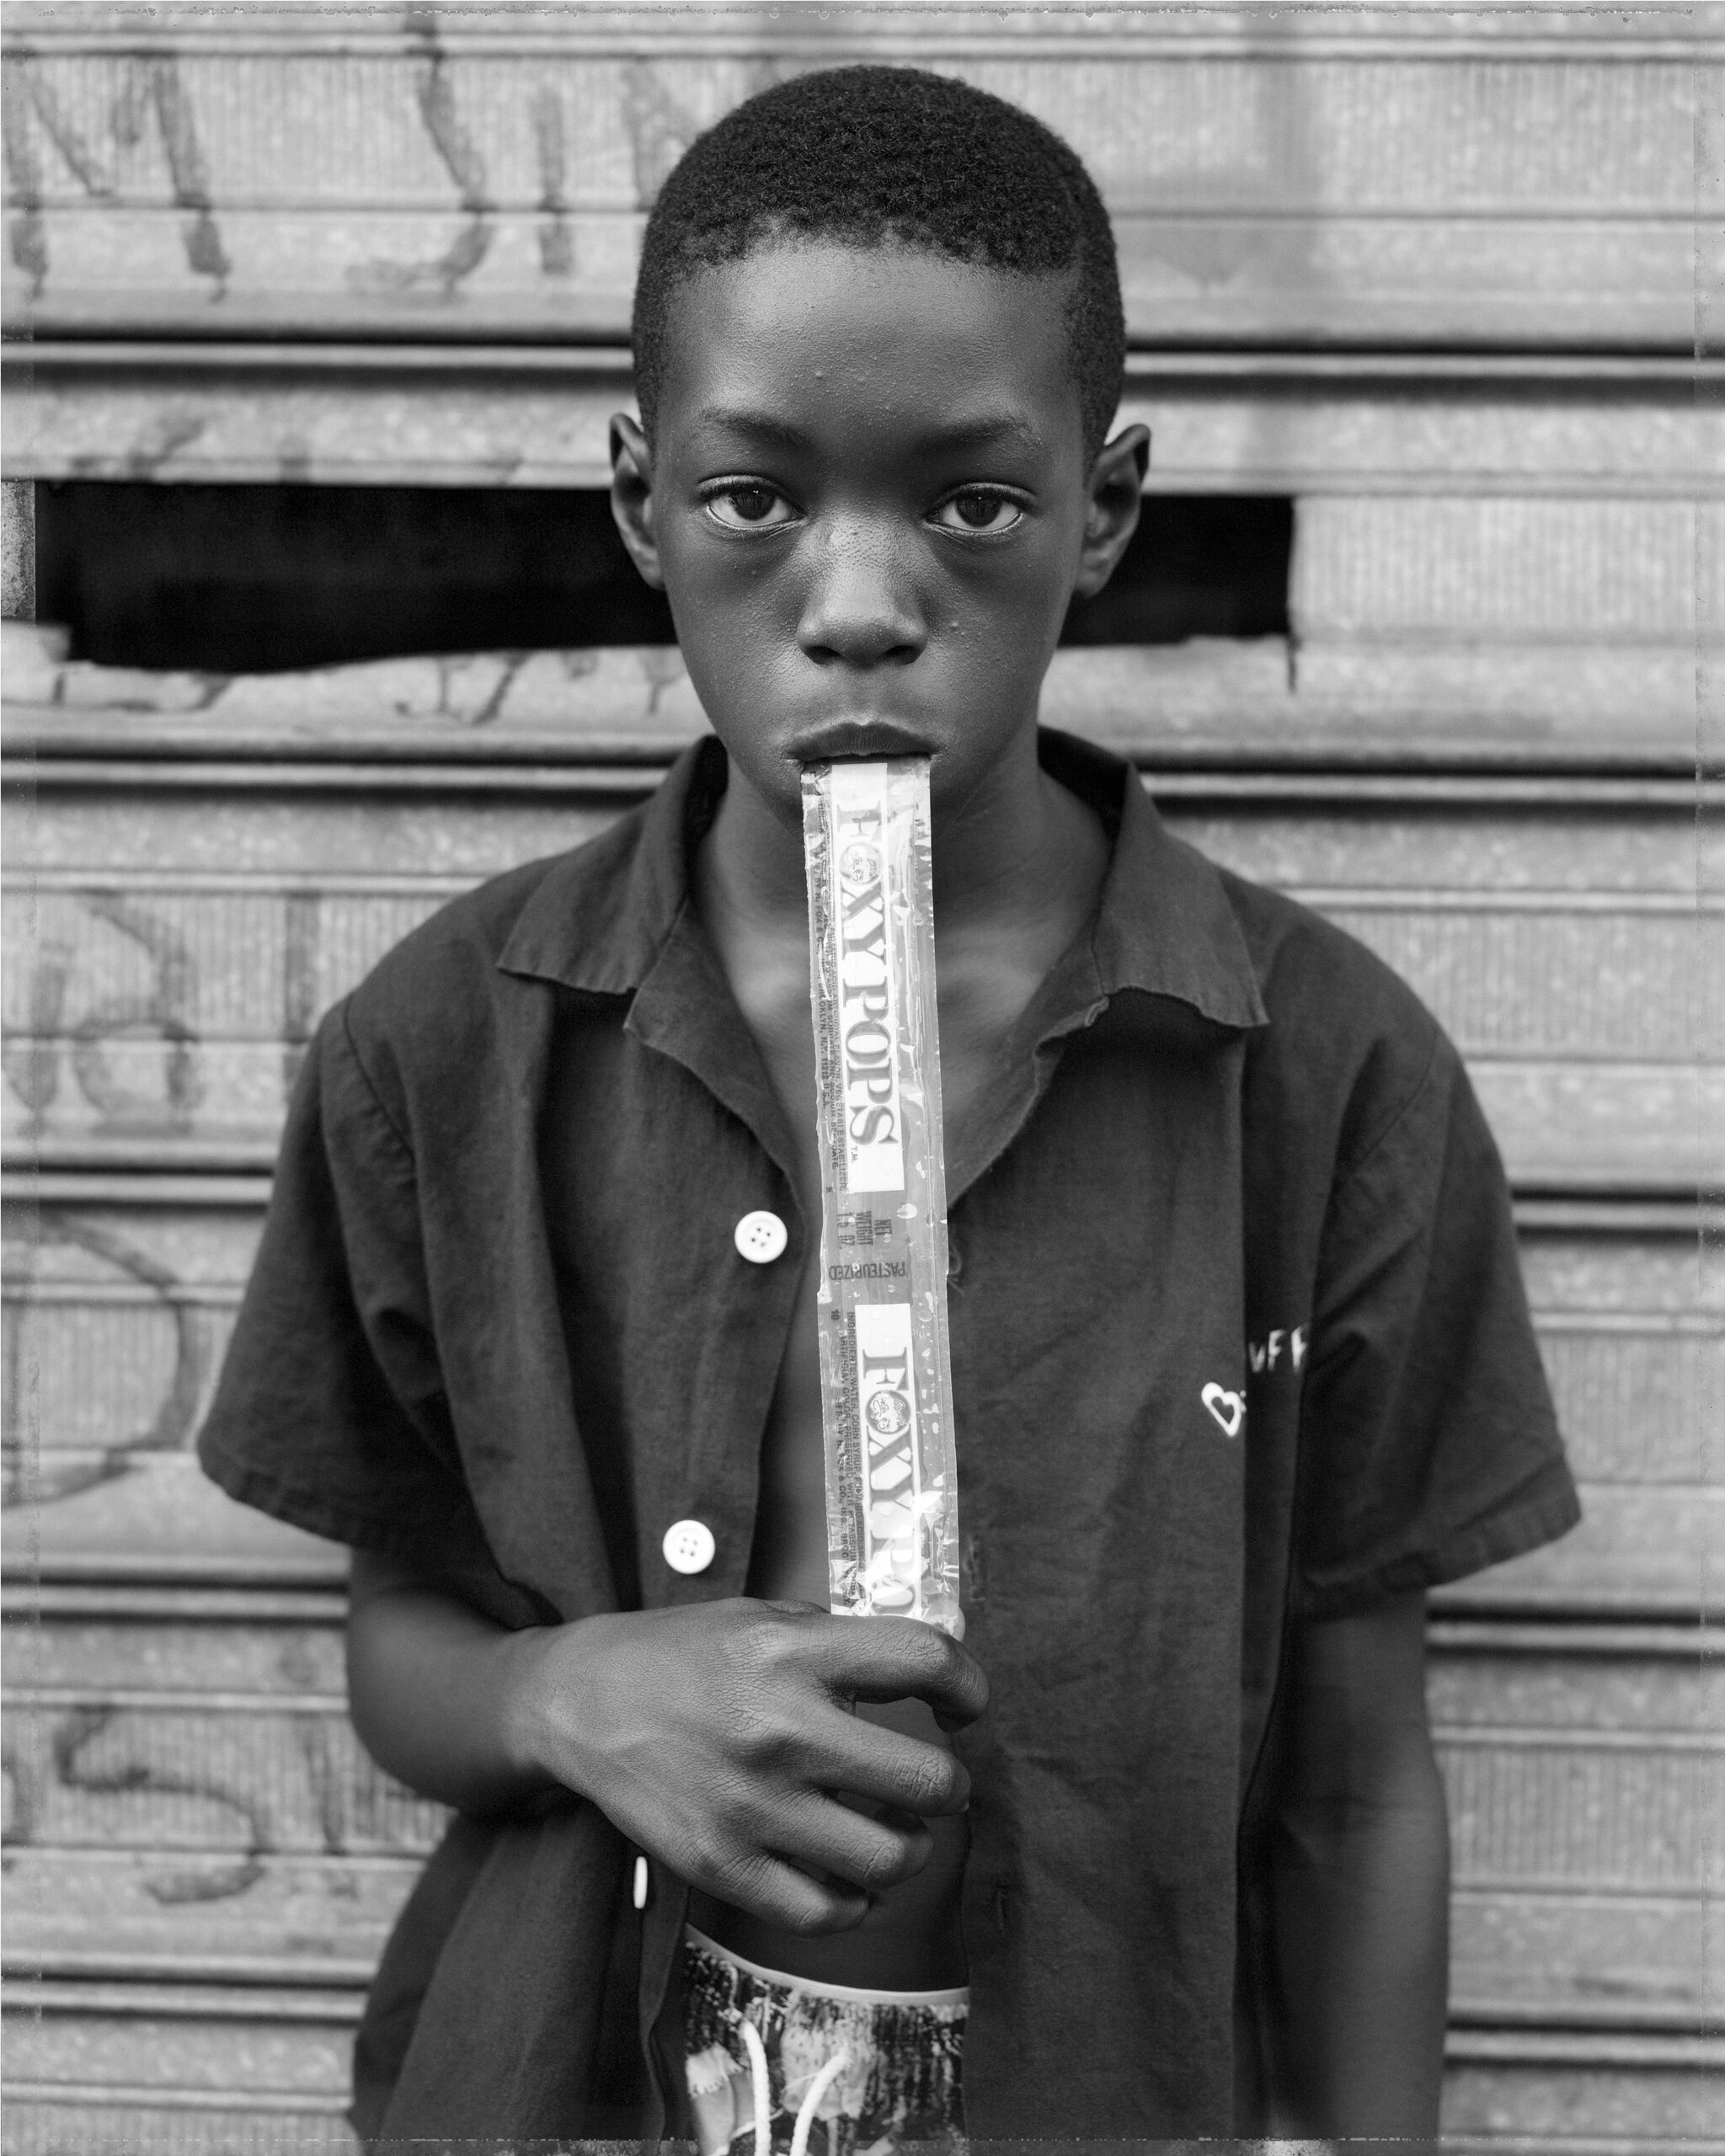 A portrait of a young boy eating an ice cream pop. 